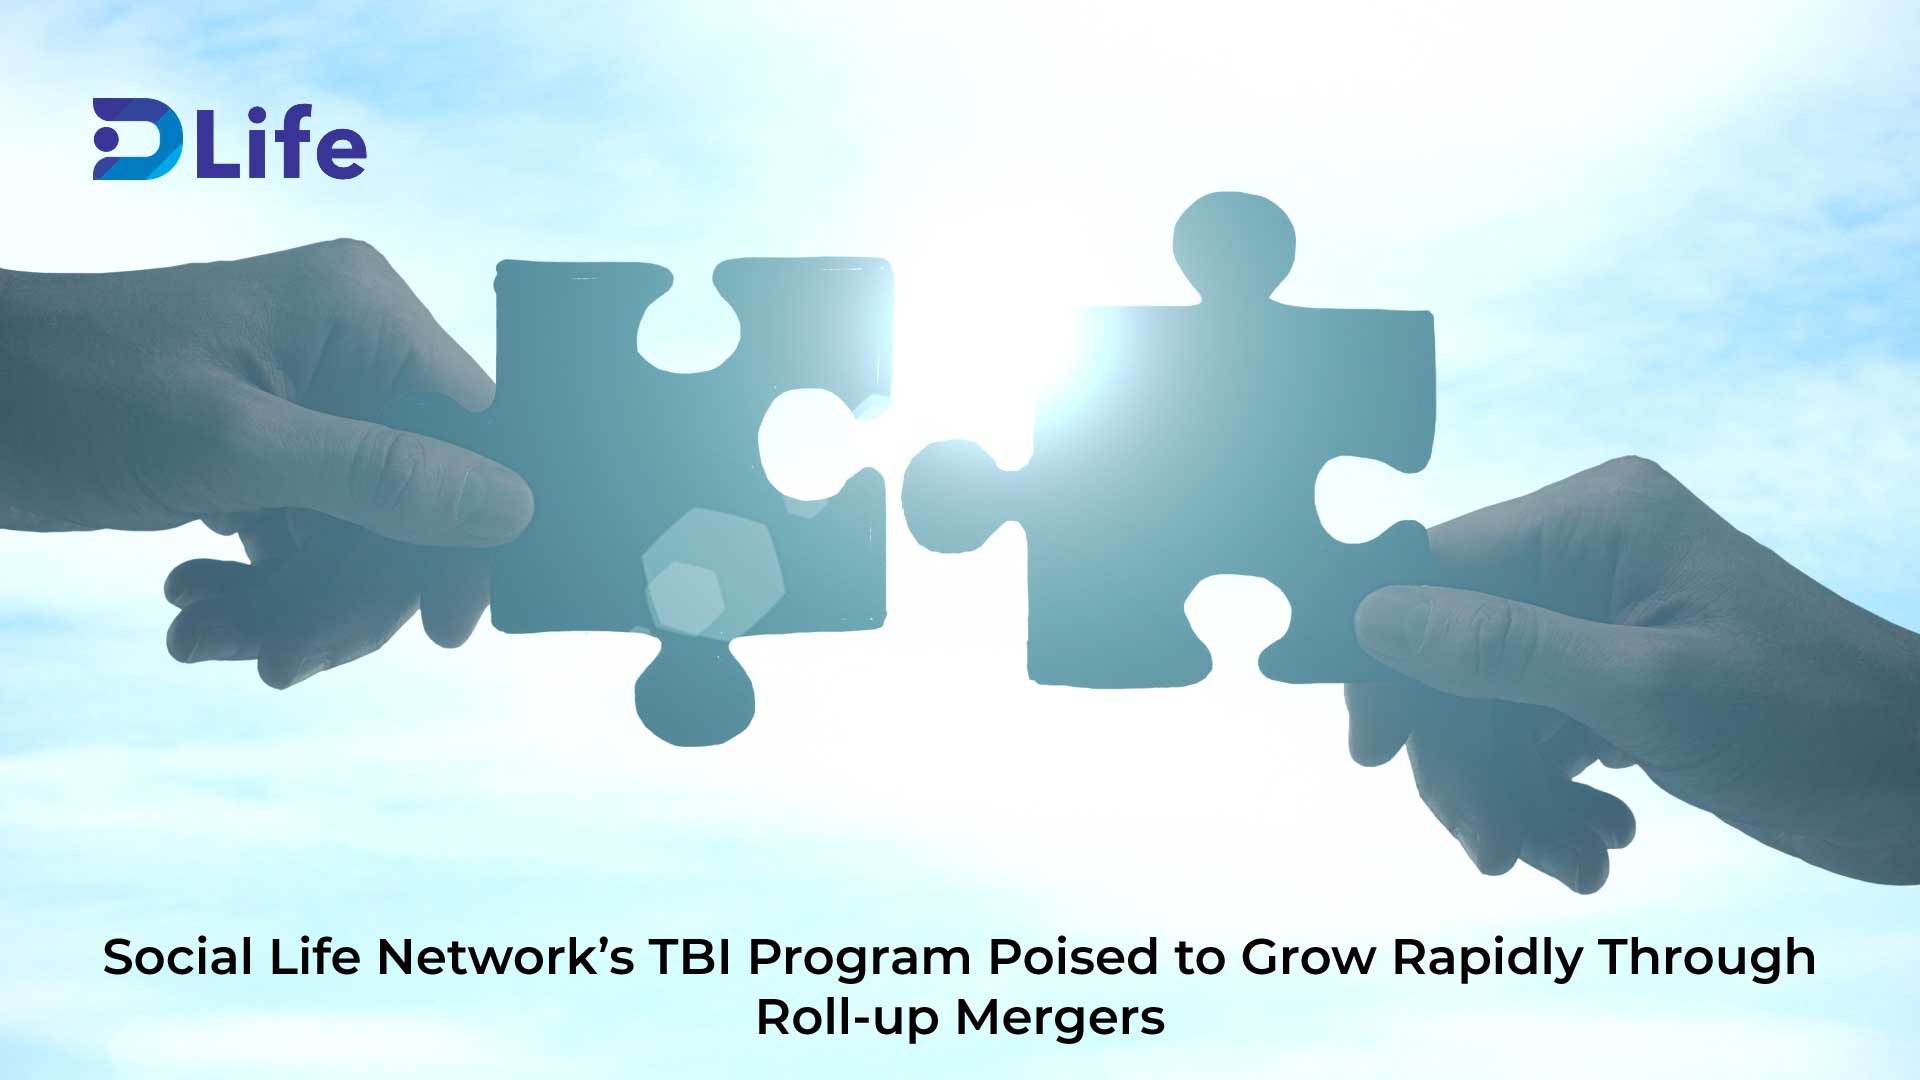 Social Life Network’s TBI program poised to grow rapidly through roll-up mergers